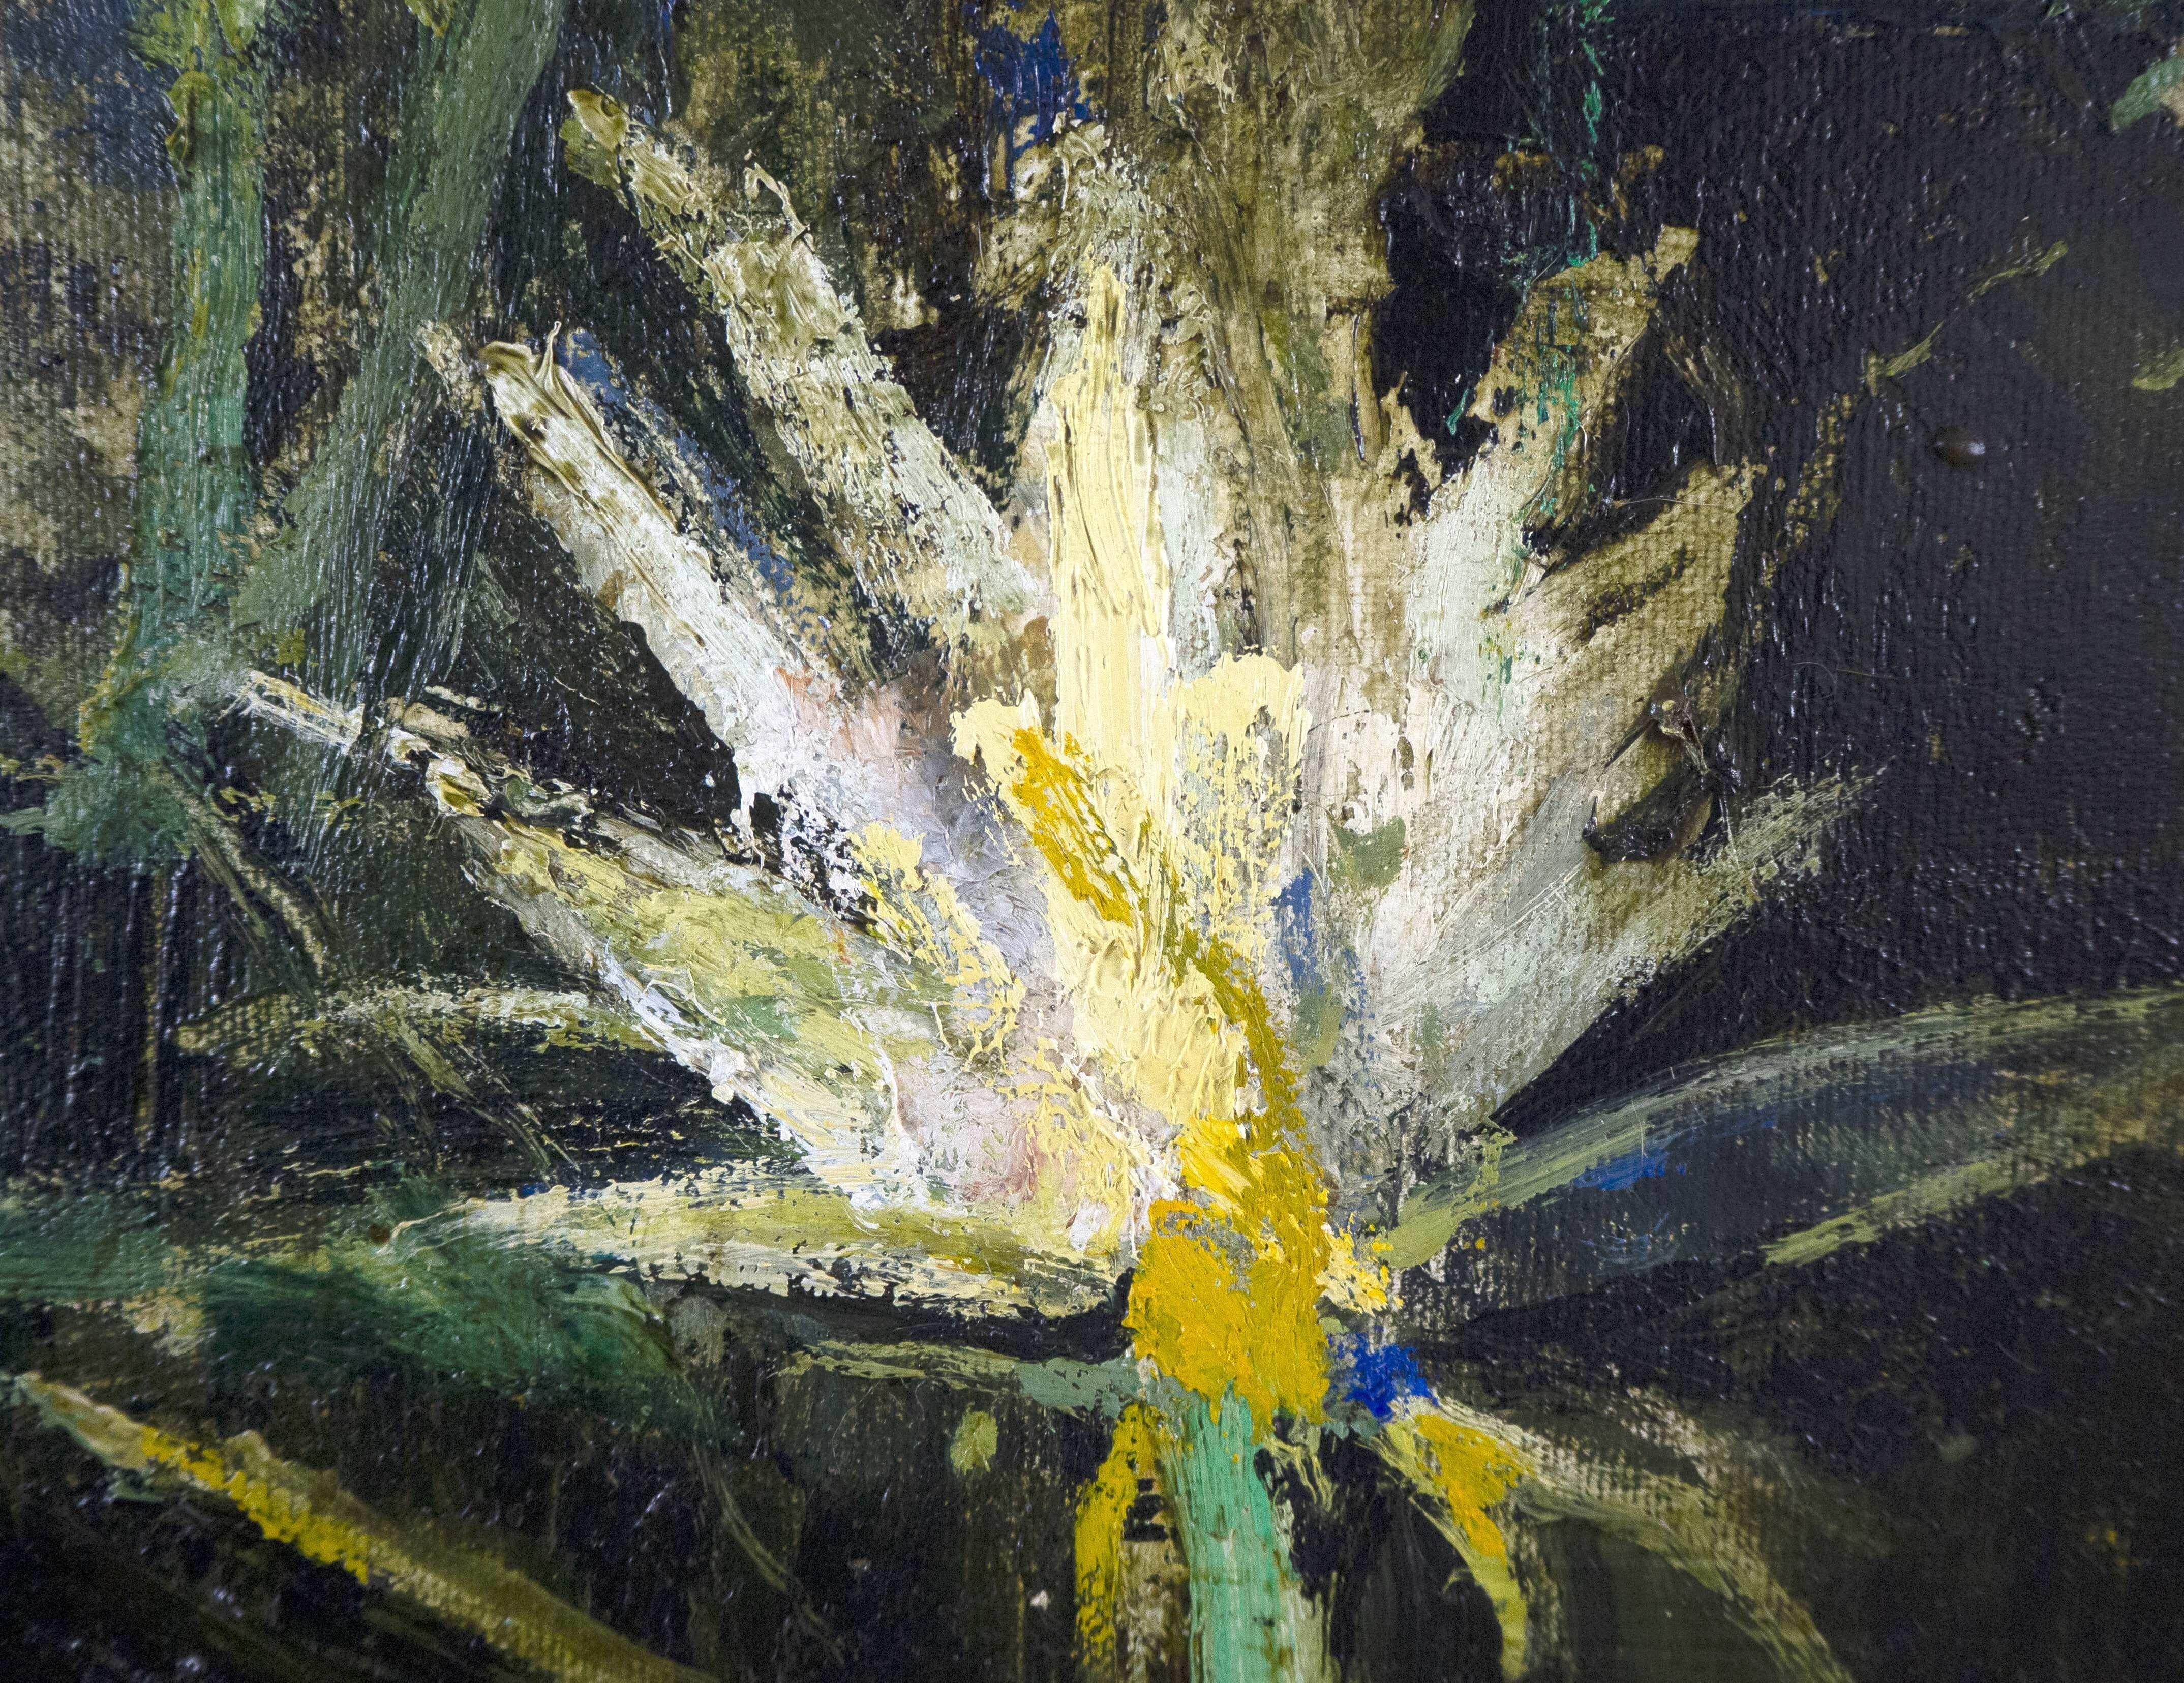 John Alexander, Windmill Spring, 1991, painting, oil on canvas, lily pond 1